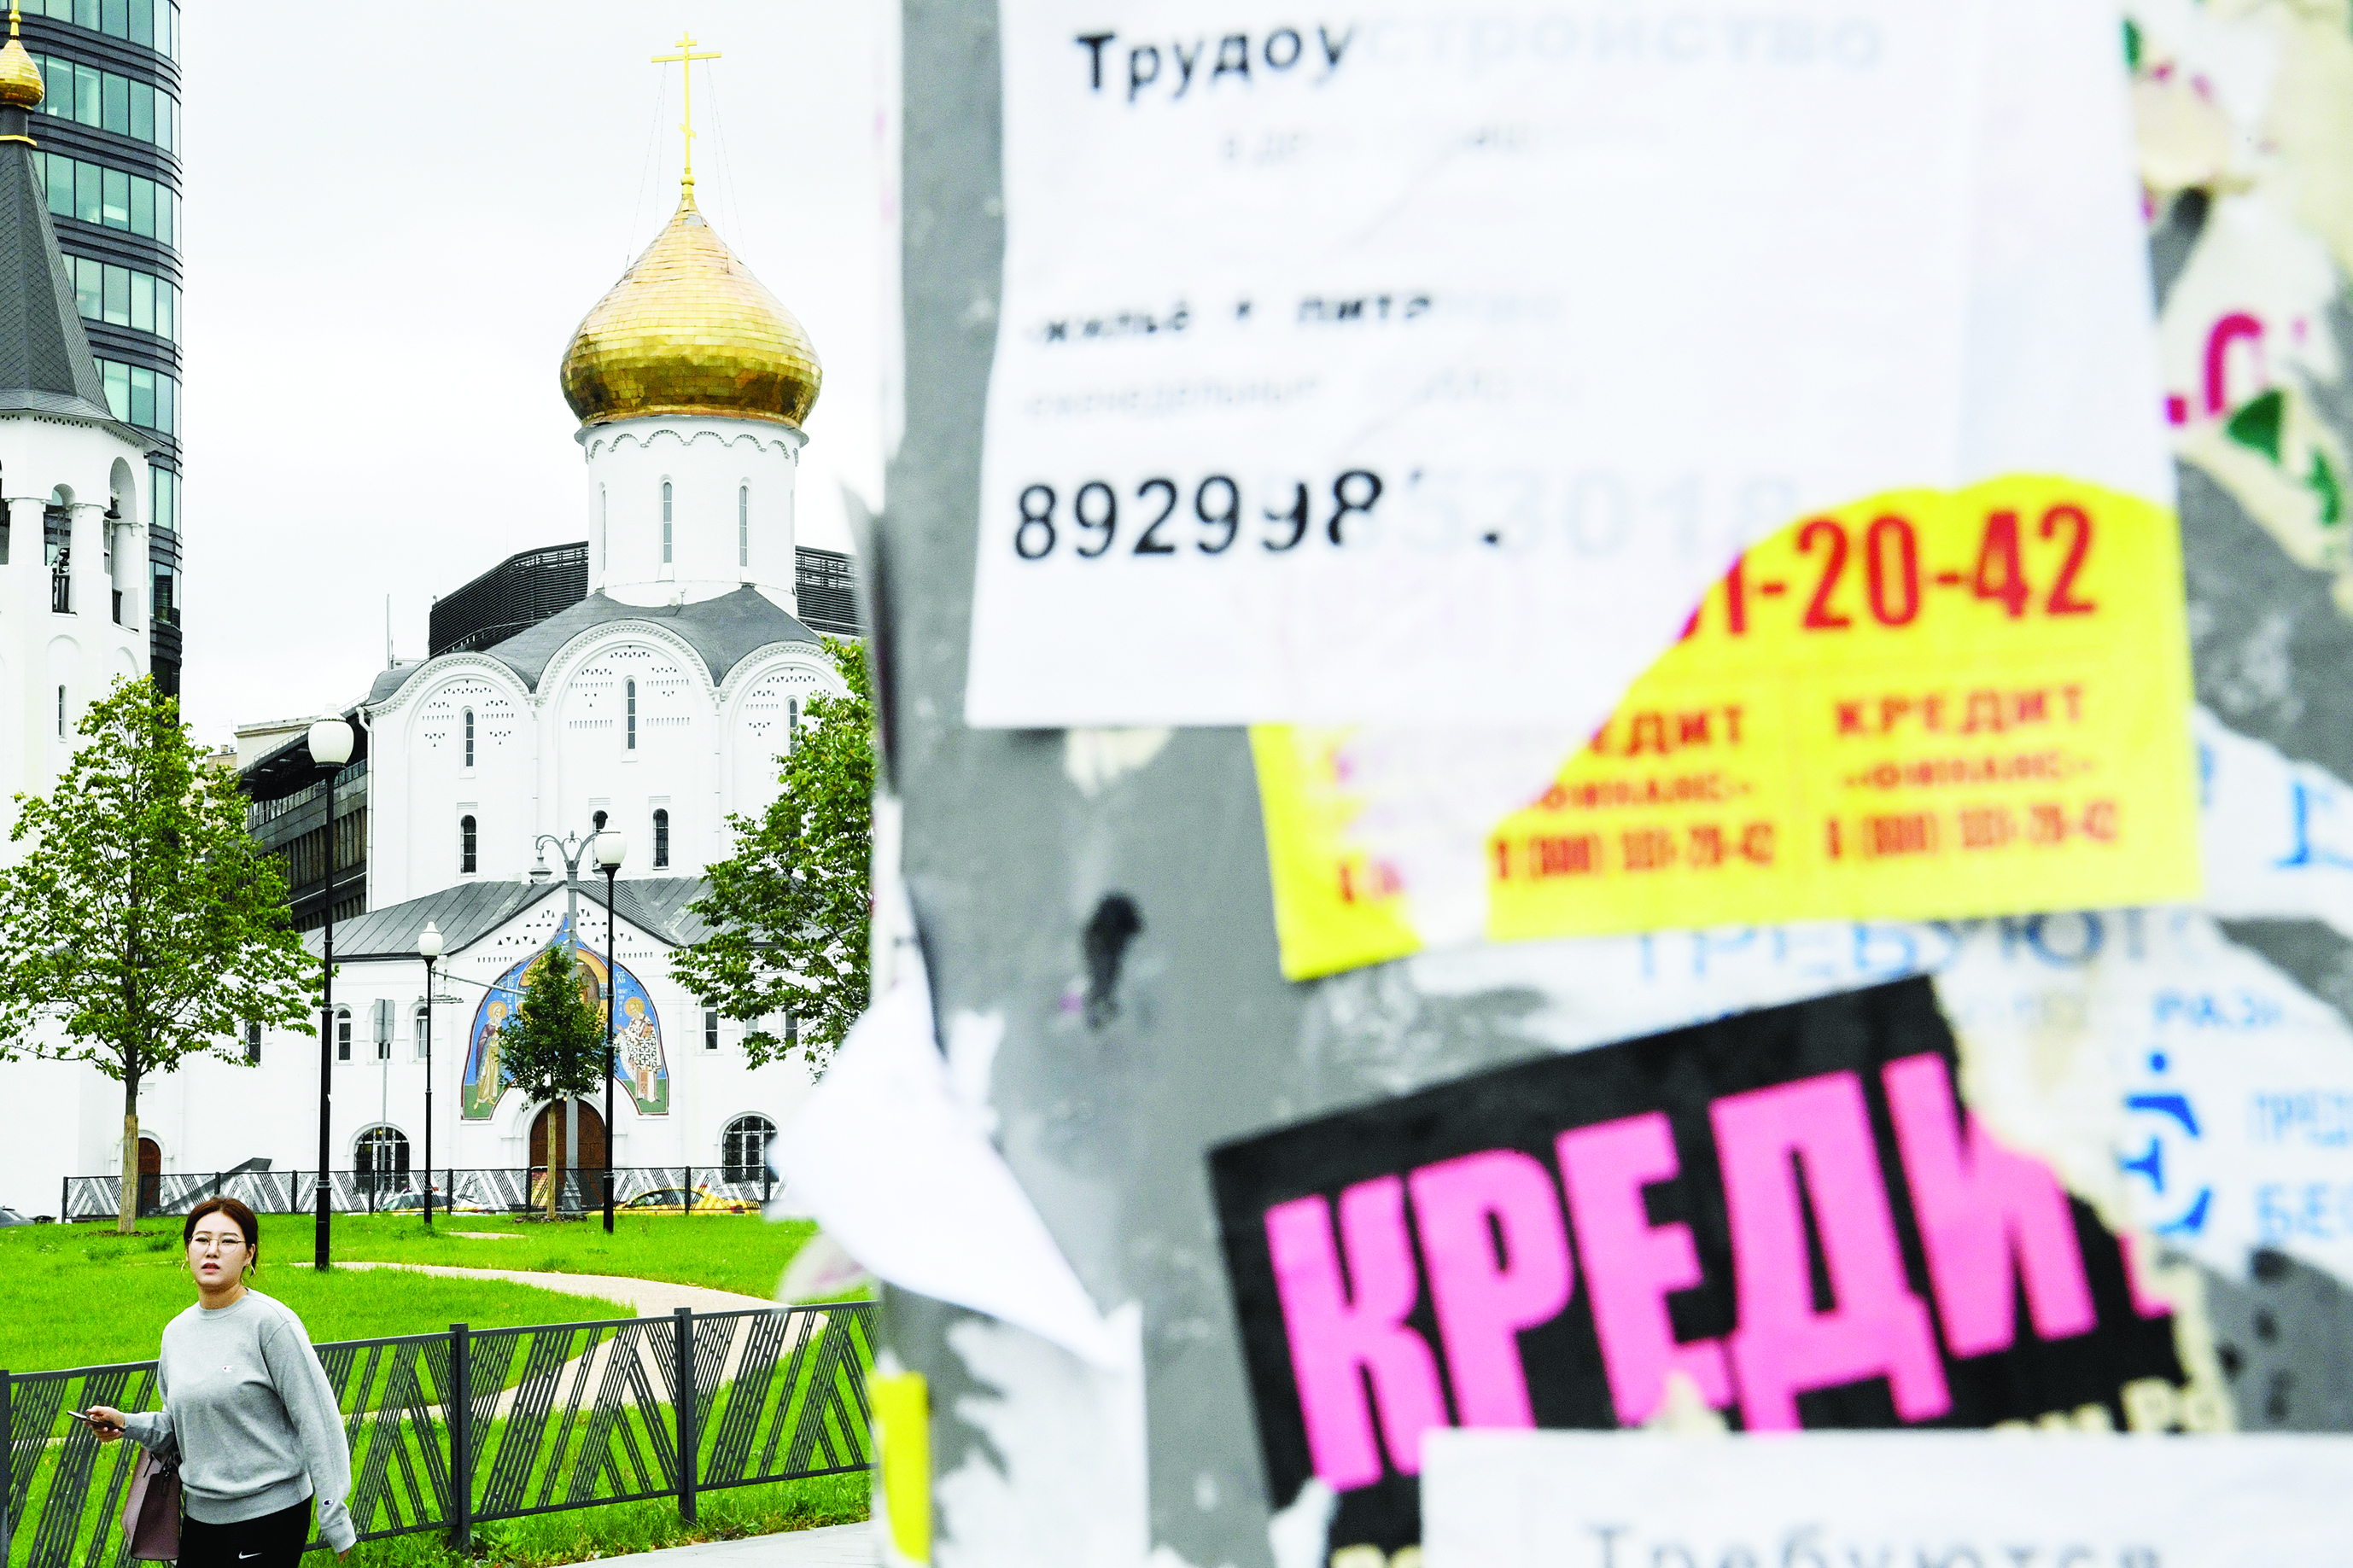 A woman passes a notice advertising loans, with a church seen in the background, in downtown Moscow on August 14, 2019. (Photo by Kirill KUDRYAVTSEV / AFP)